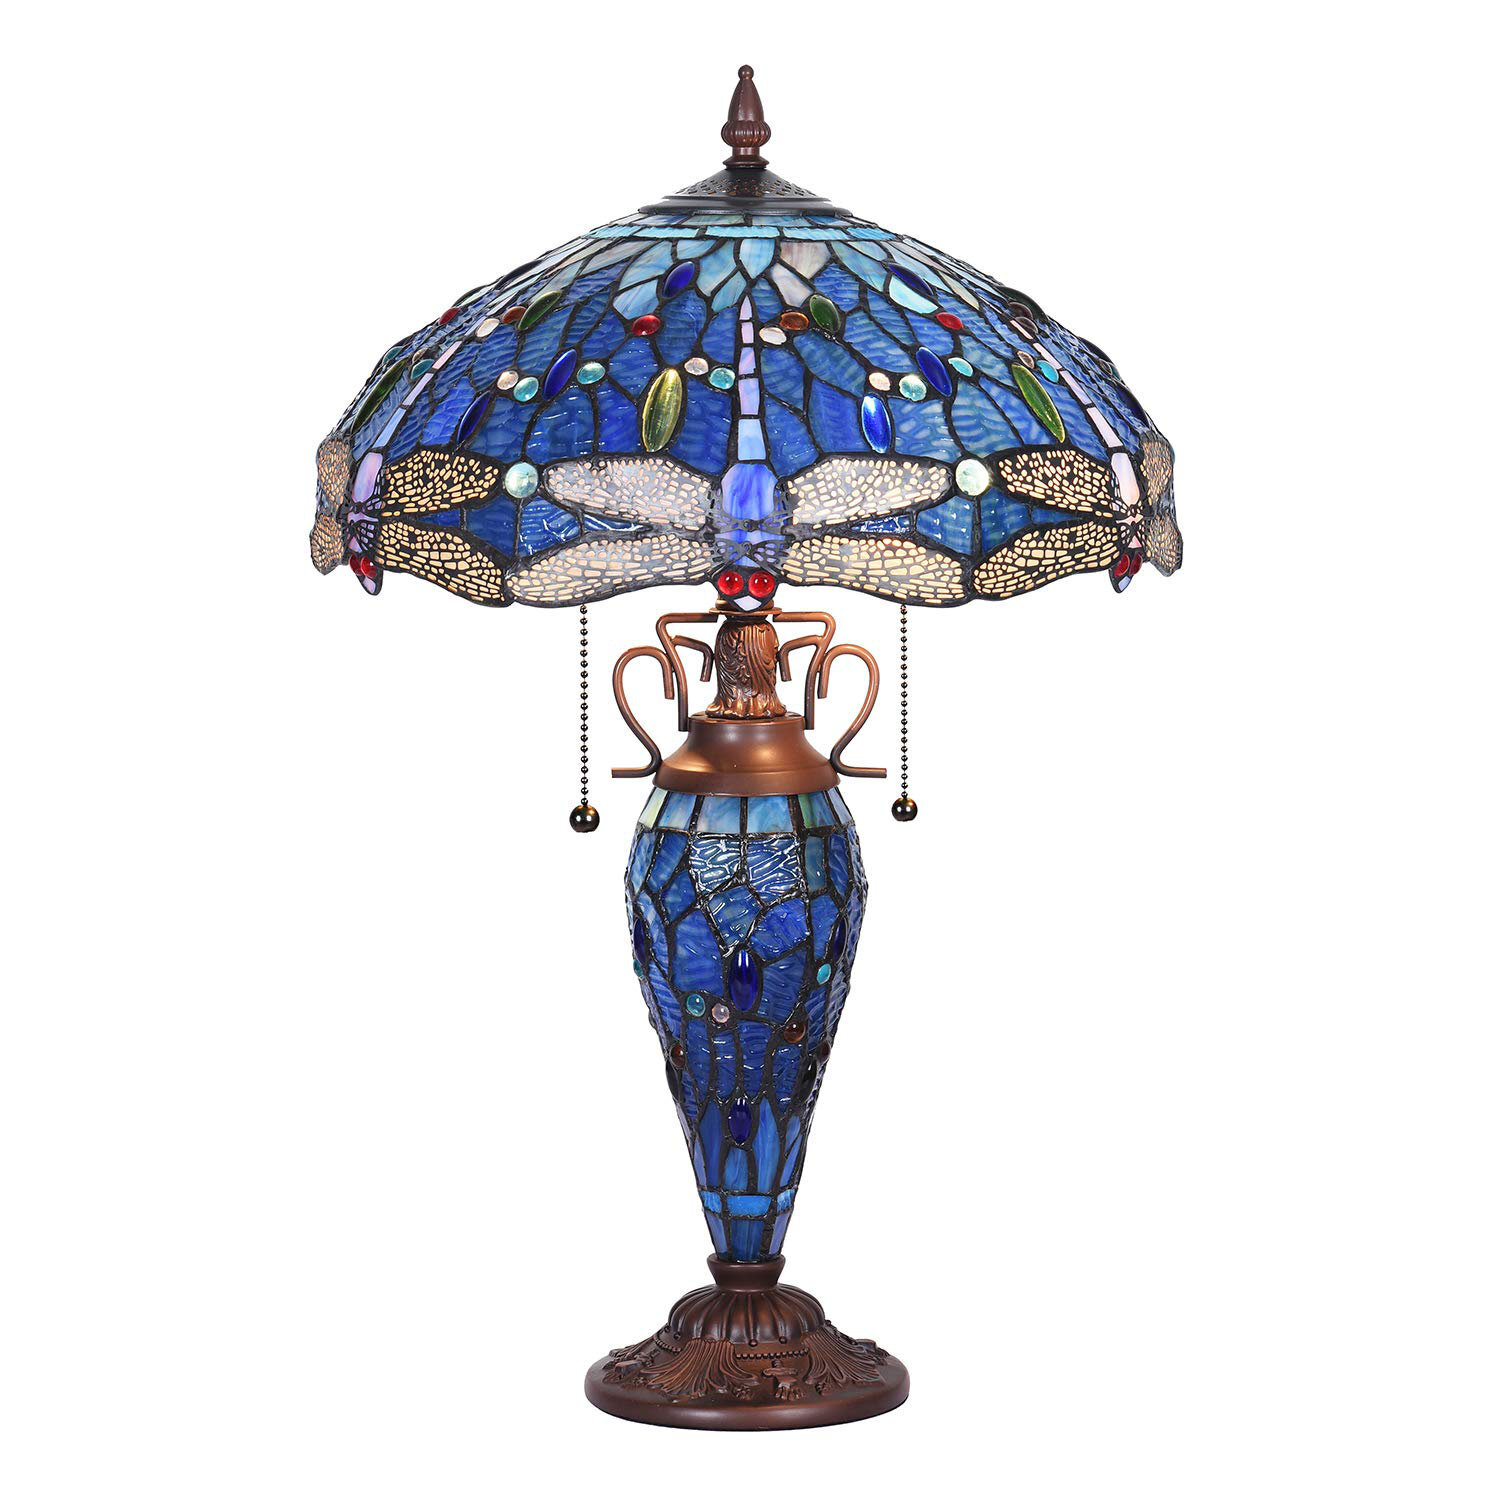 Dragonfly Style Tiffany Large Table Lamp 3-Light With Nightlight Rustic Antique Desk Light